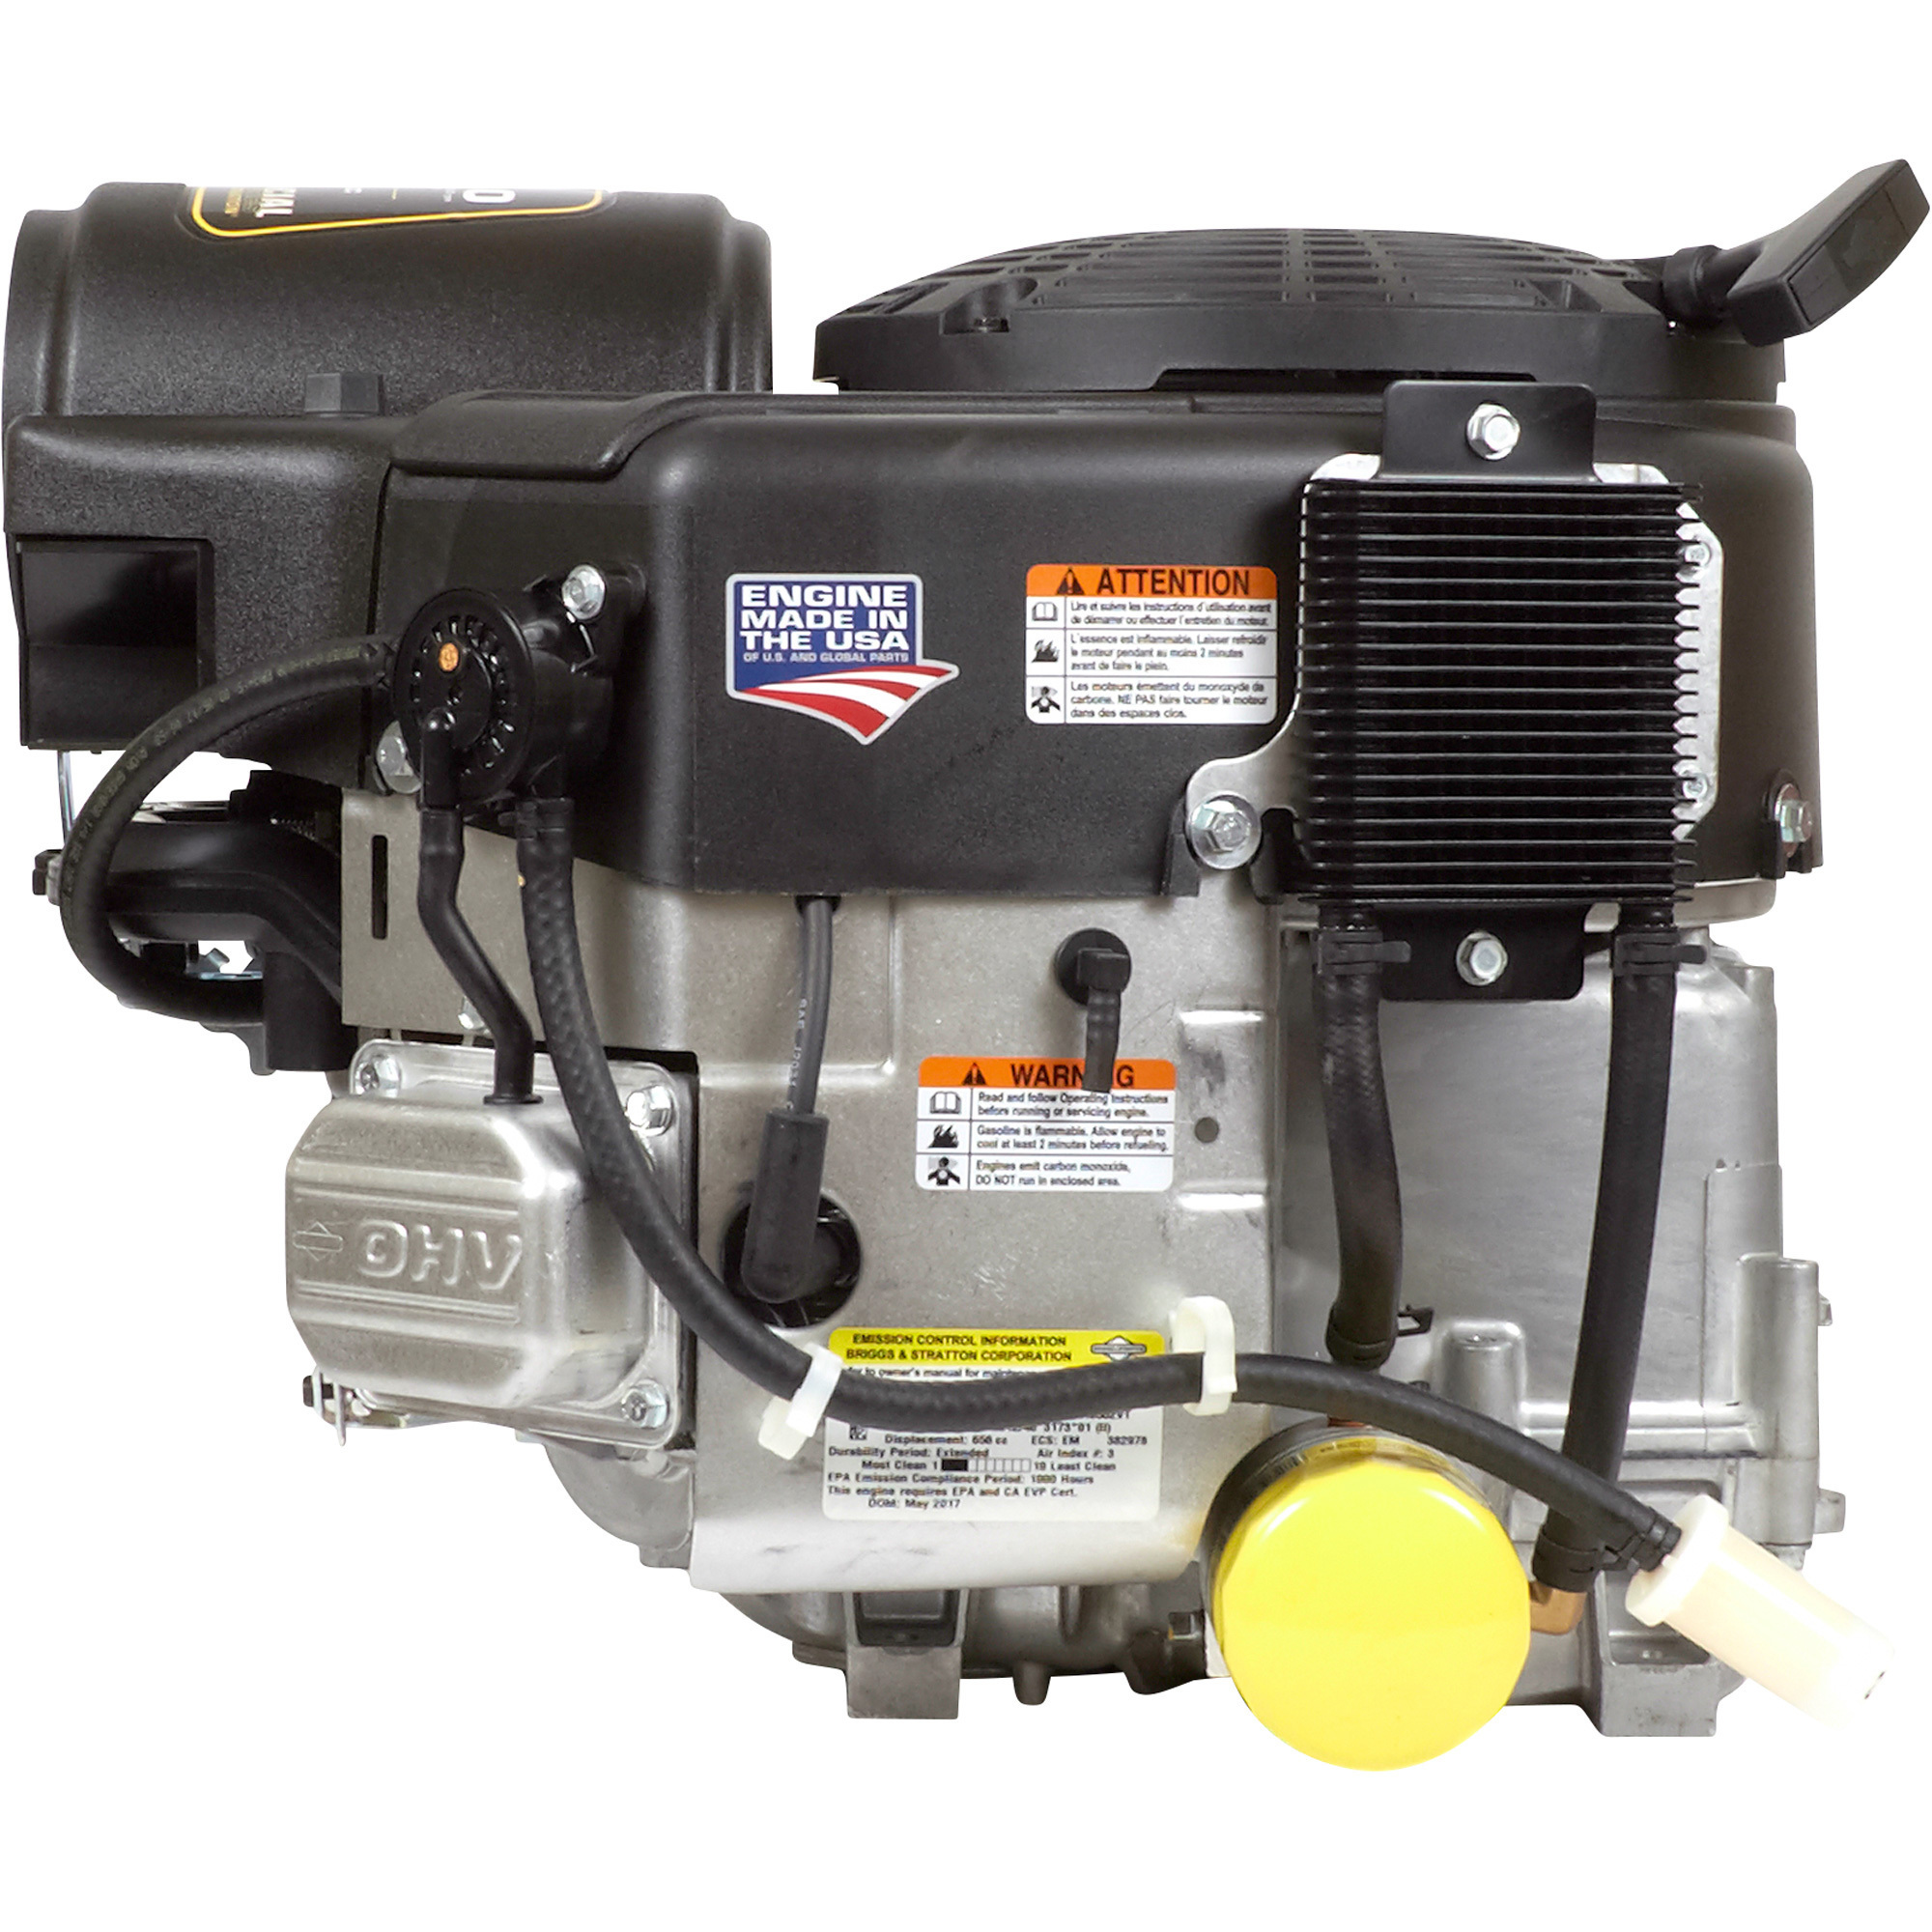 Briggs & Stratton Commercial Turf Series Twin Cylinder OHV Vertical Shaft  Engine, 20HP, 1in. x 3 5/32in. Shaft, Model# 40T876-0009-G1